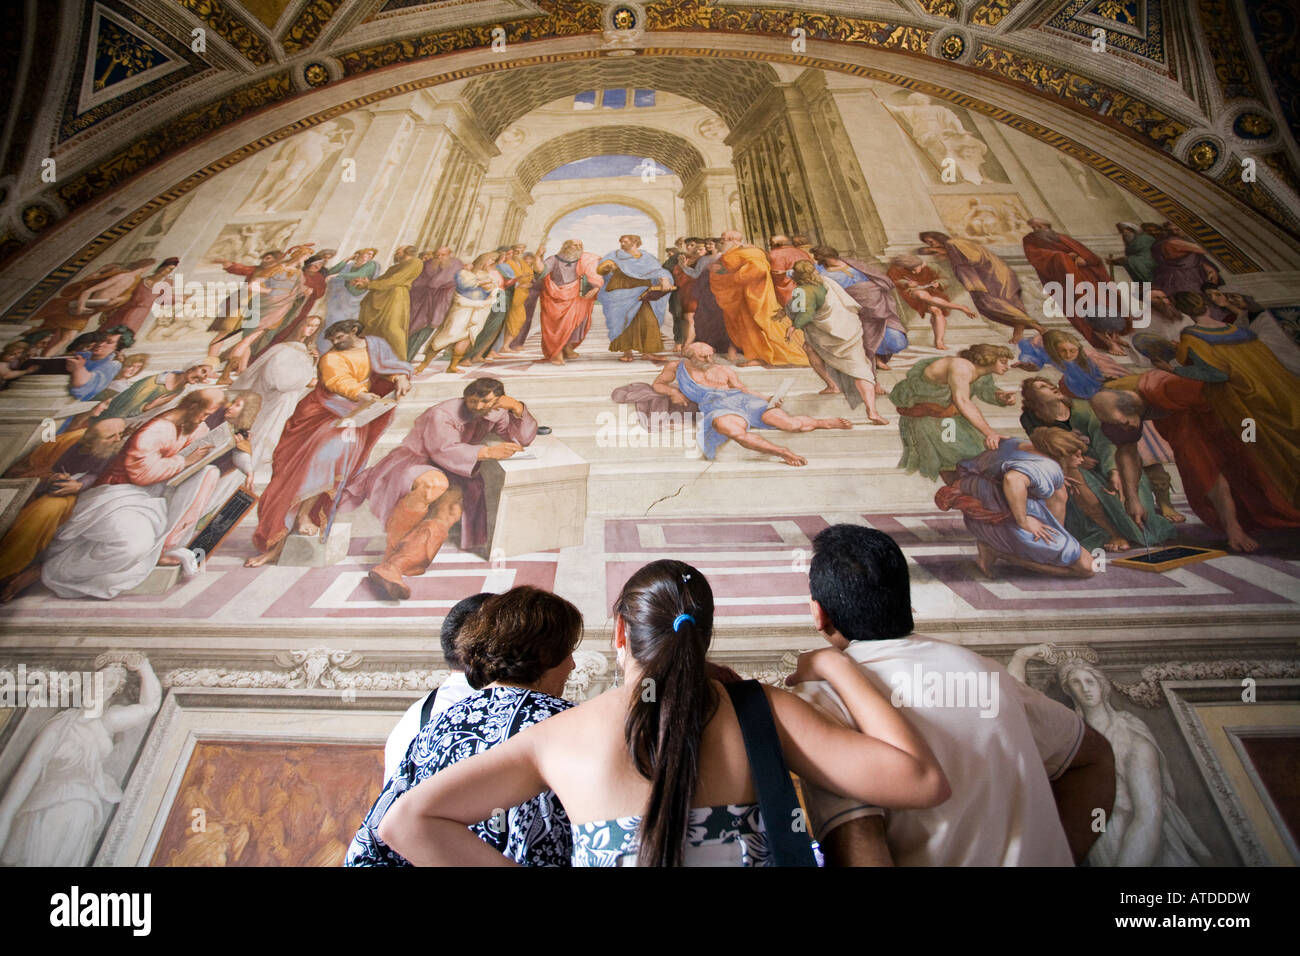 Visitors admiring the School of Athens painting, Rapahel's rooms, Vatican museums Stock Photo